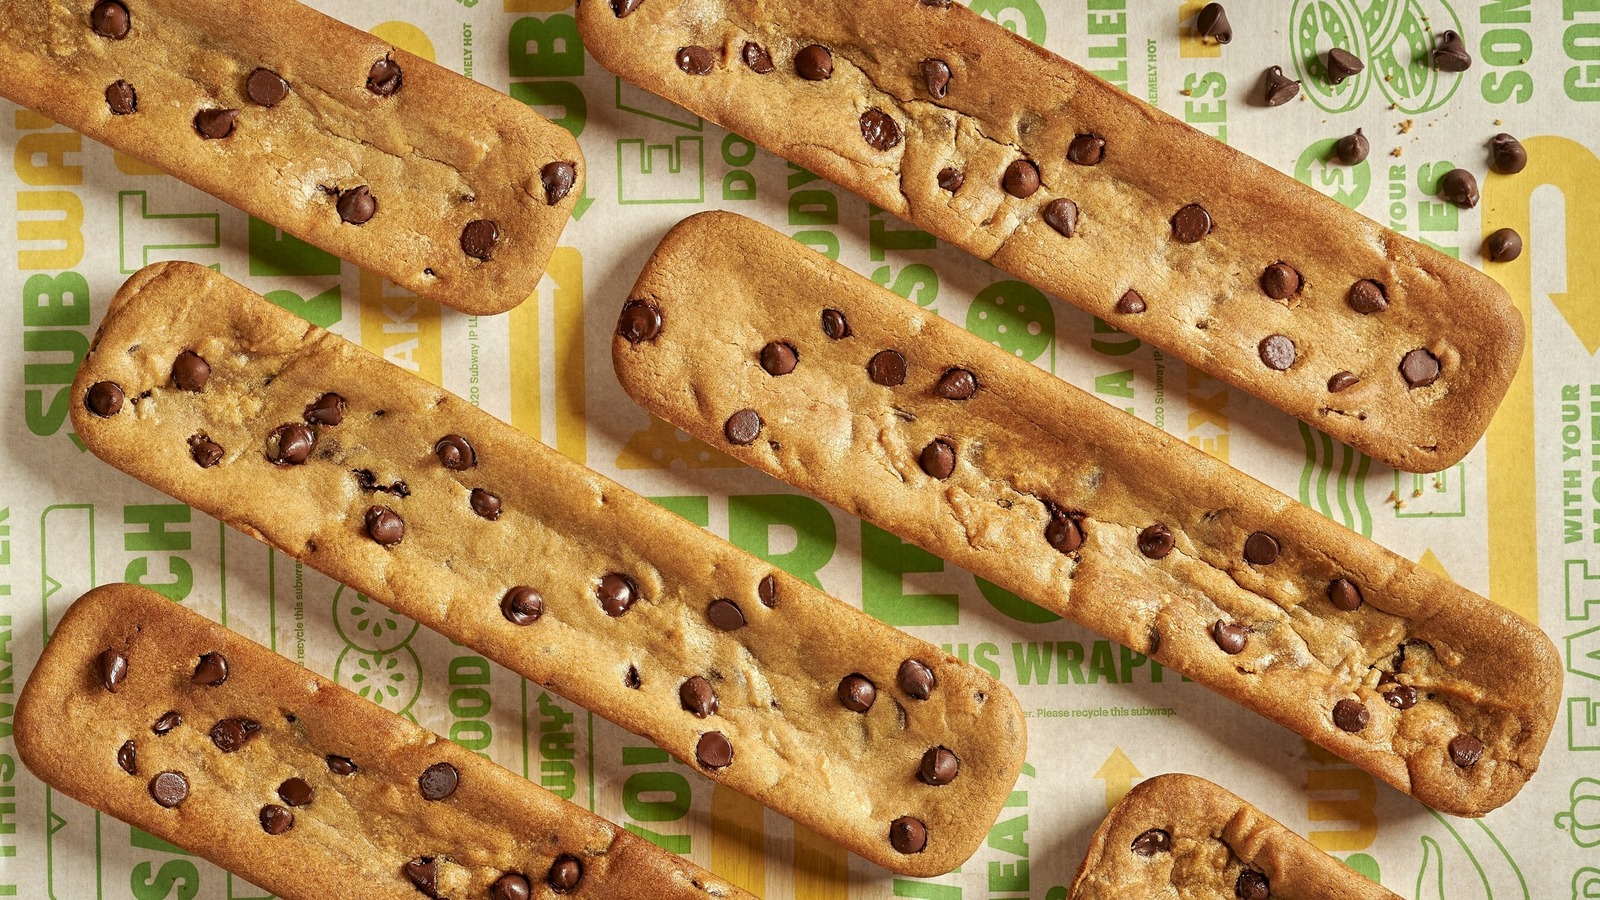 subway-adds-a-footlong-cookie-at-some-locations-for-national-cookie-day